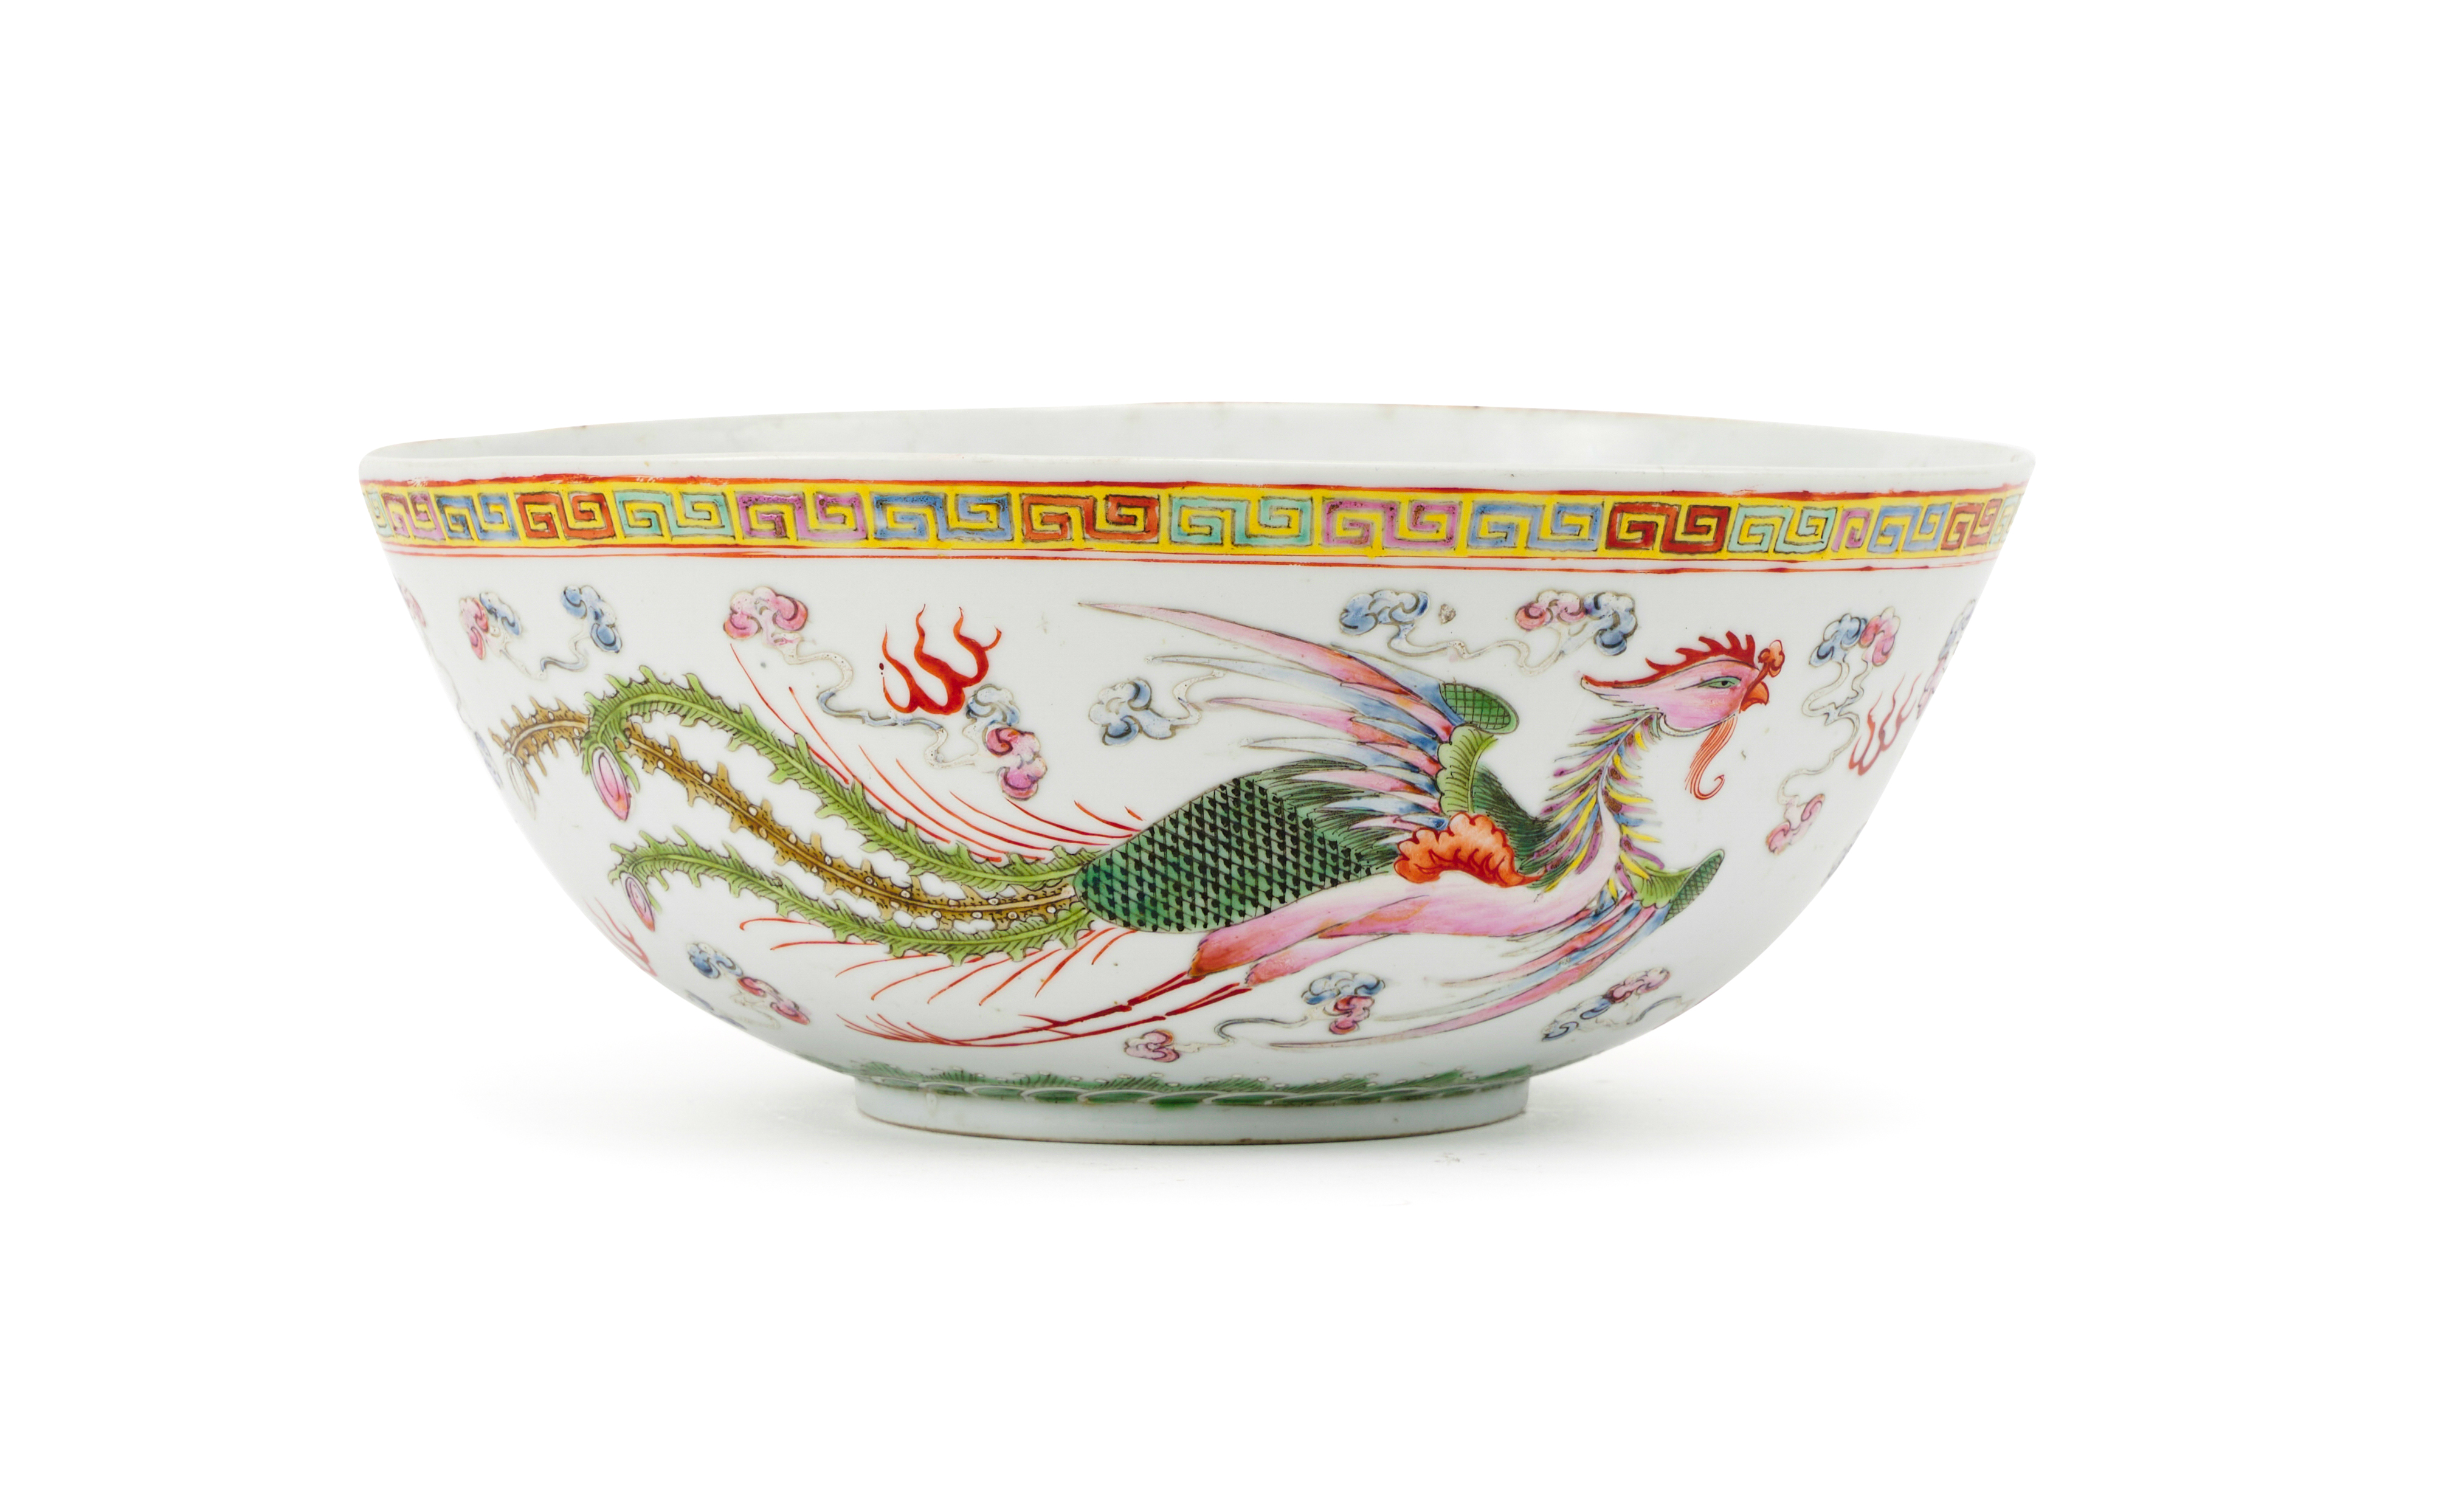 A LARGE CHINESE FAMILLE ROSE DRAGON & PHOENIX BOWL, QING DYNASTY (1644-1911) - Image 2 of 5